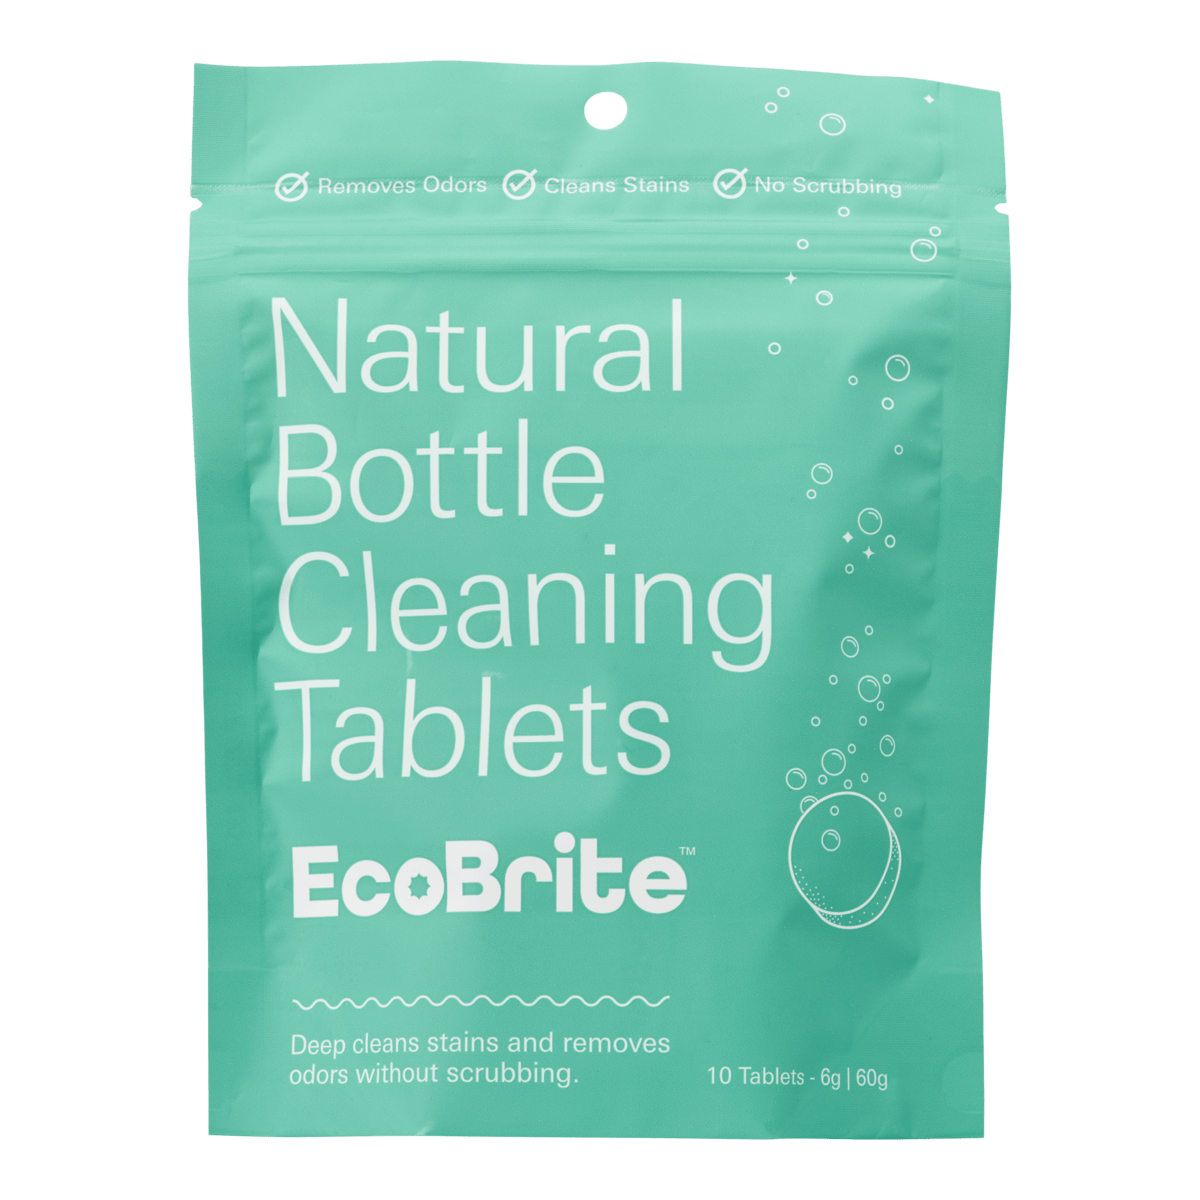 Bottle Cleaning Tablets